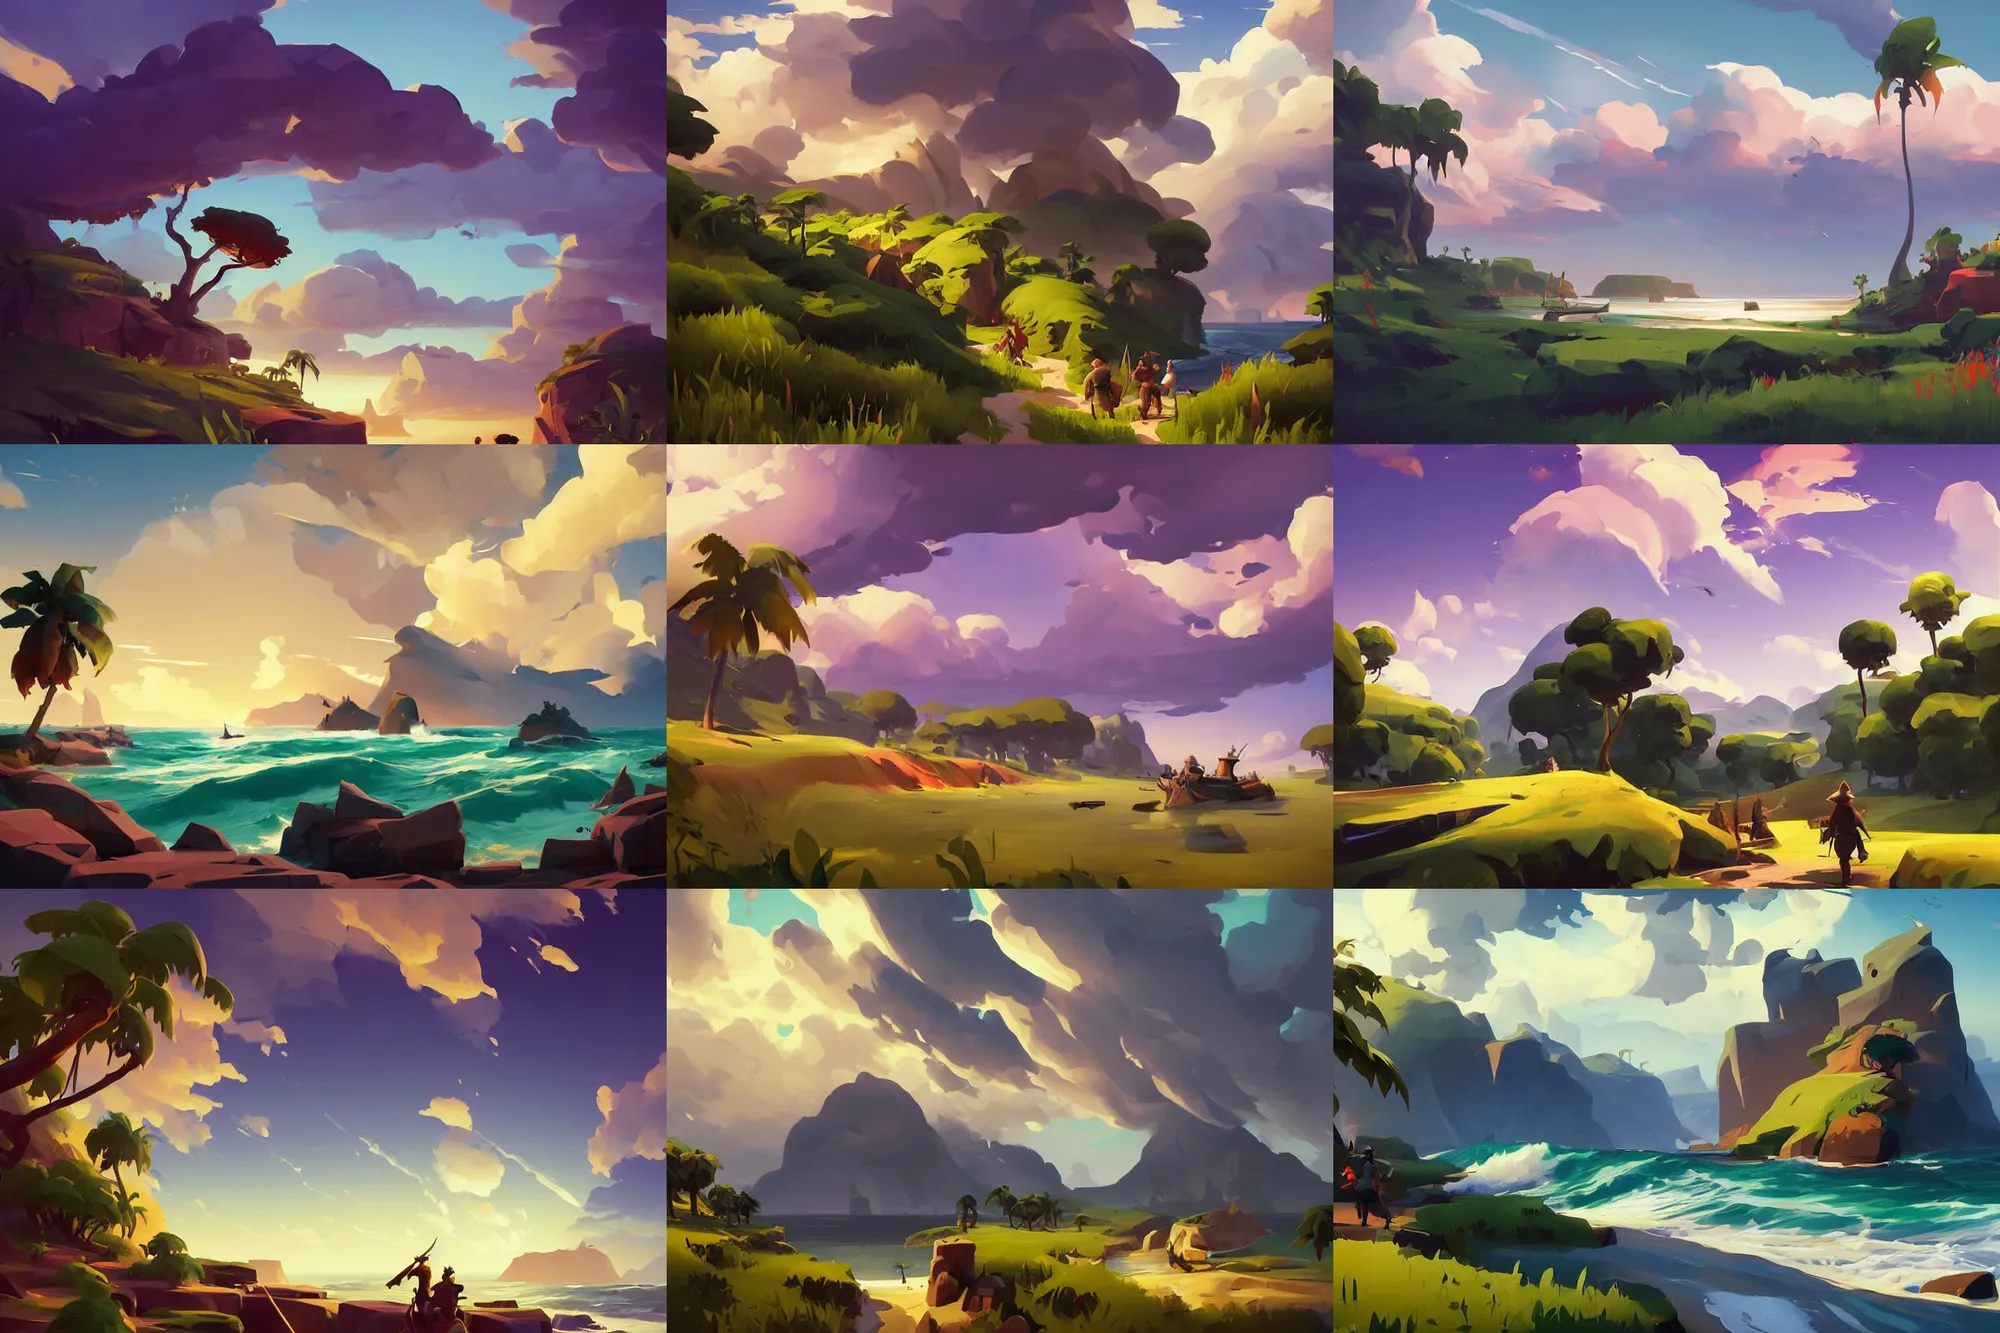 Prompt: landscape painting by sargent painting treasure on sea of thieves game smooth median photoshop filter cutout vector, behance hd by jesper ejsing, by rhads, makoto shinkai and lois van baarle, ilya kuvshinov, rossdraws global illumination adove low clouds sky image overcast